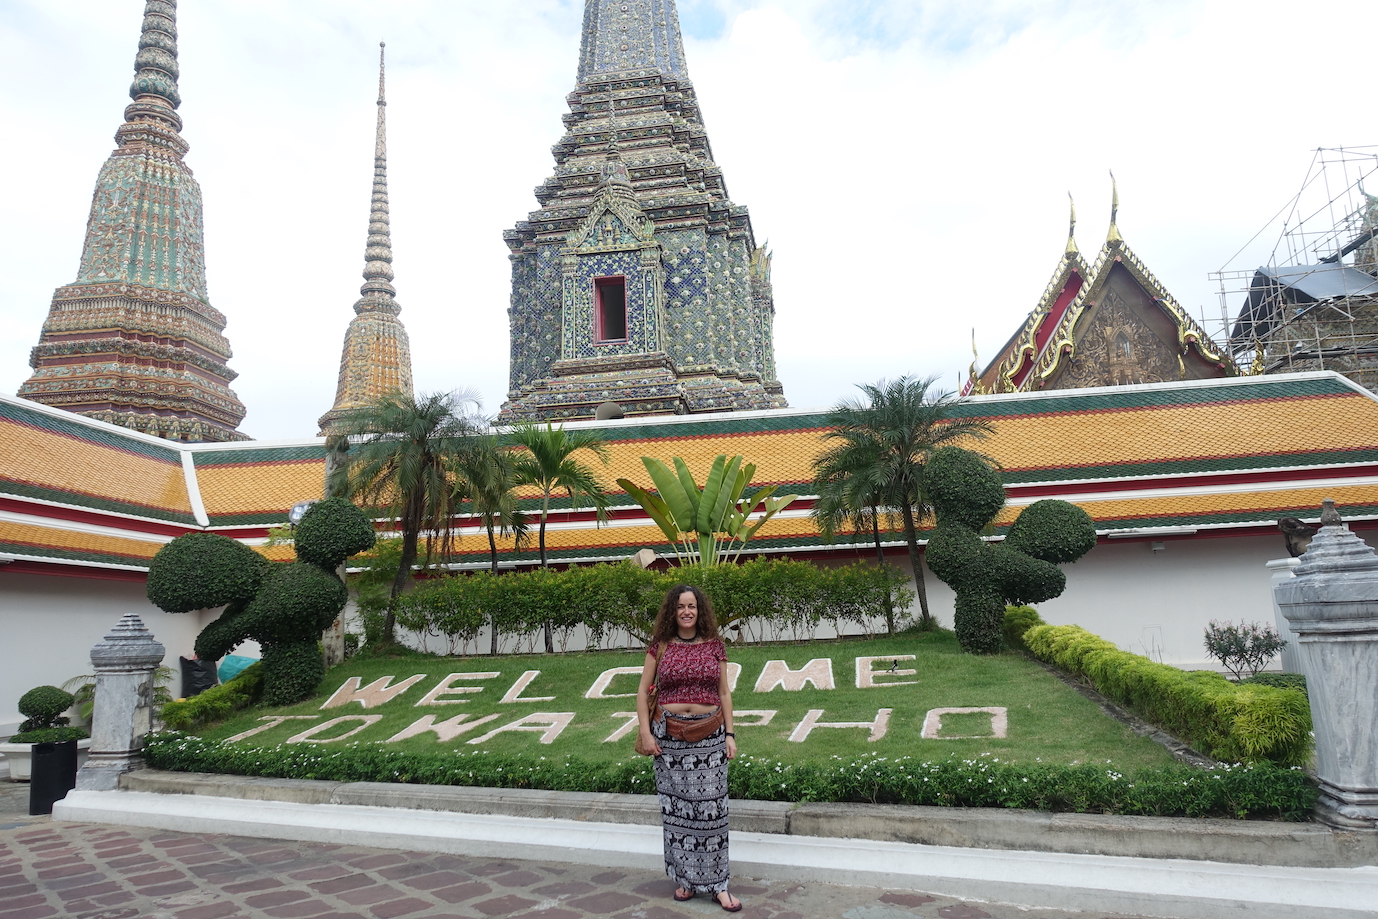 Pilar at the entrance garden of the Wat Pho temple in Bangkok. Wat Phoe is written on the grass with some flowers. There are some palm trees and other bushes and the roof of a building and some chedis on the back